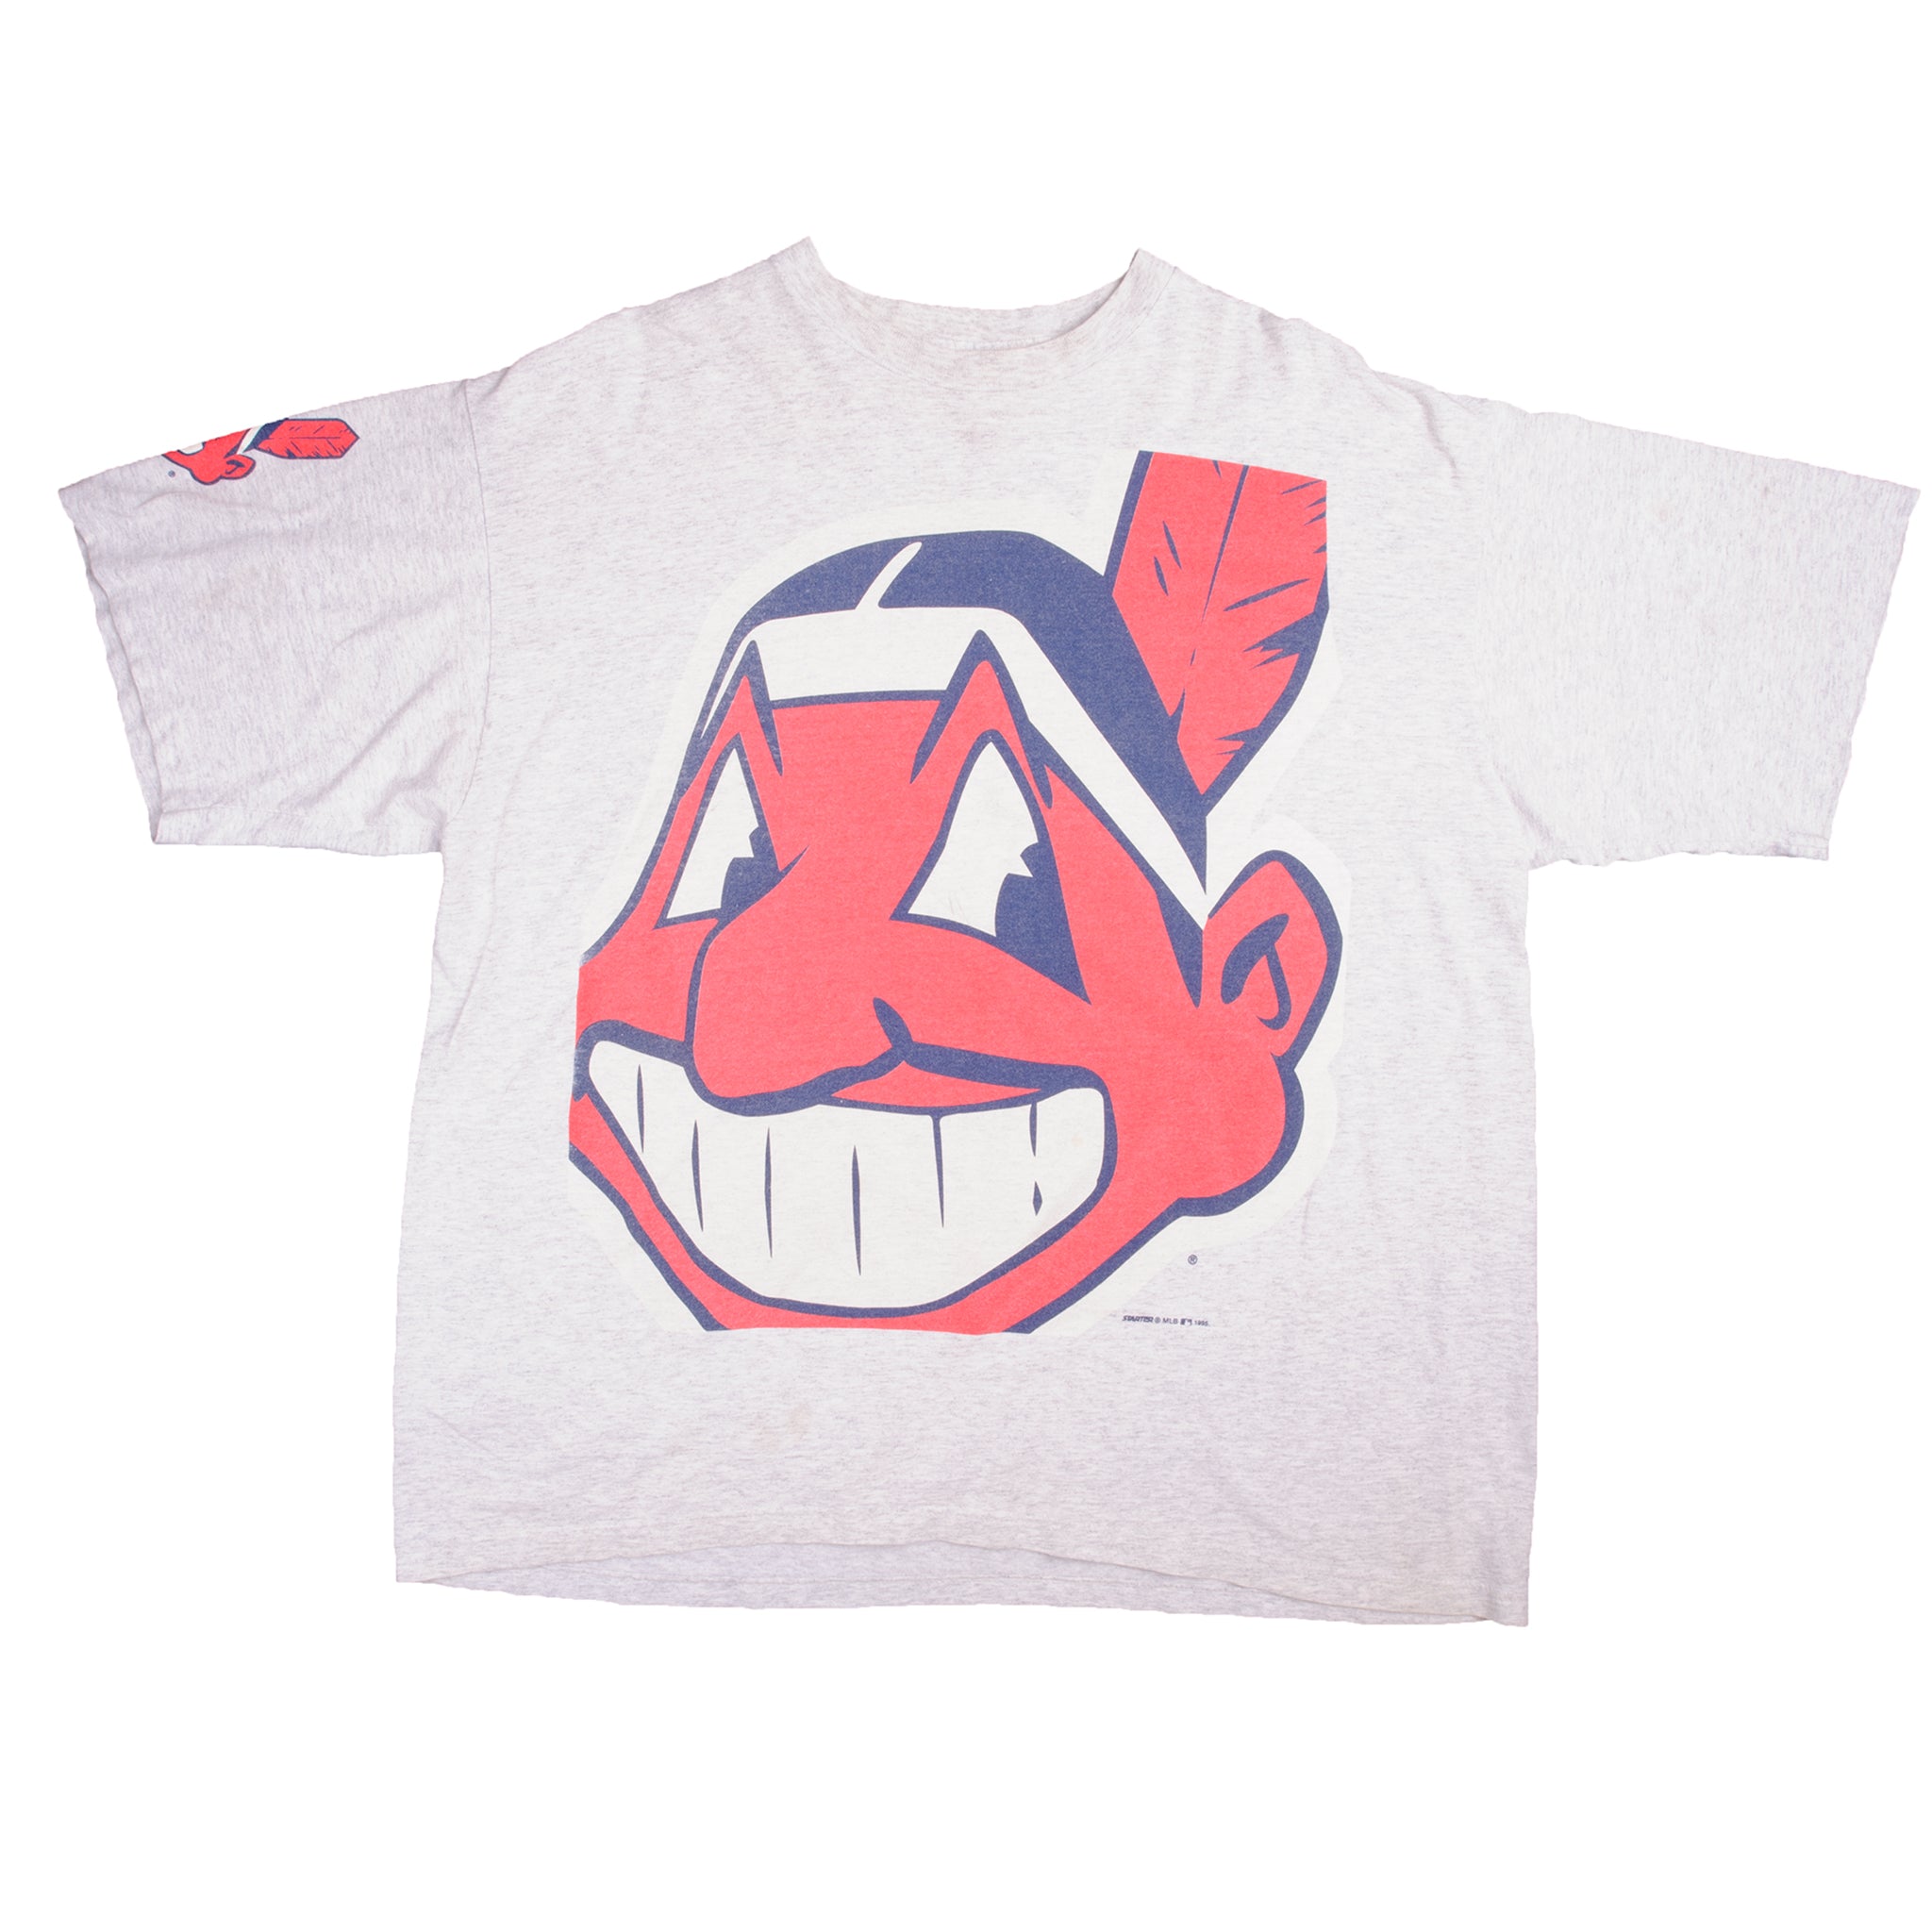 VINTAGE MLB CLEVELAND INDIANS WITH CHIEF WAHOO TEE SHIRT 1995 SIZE